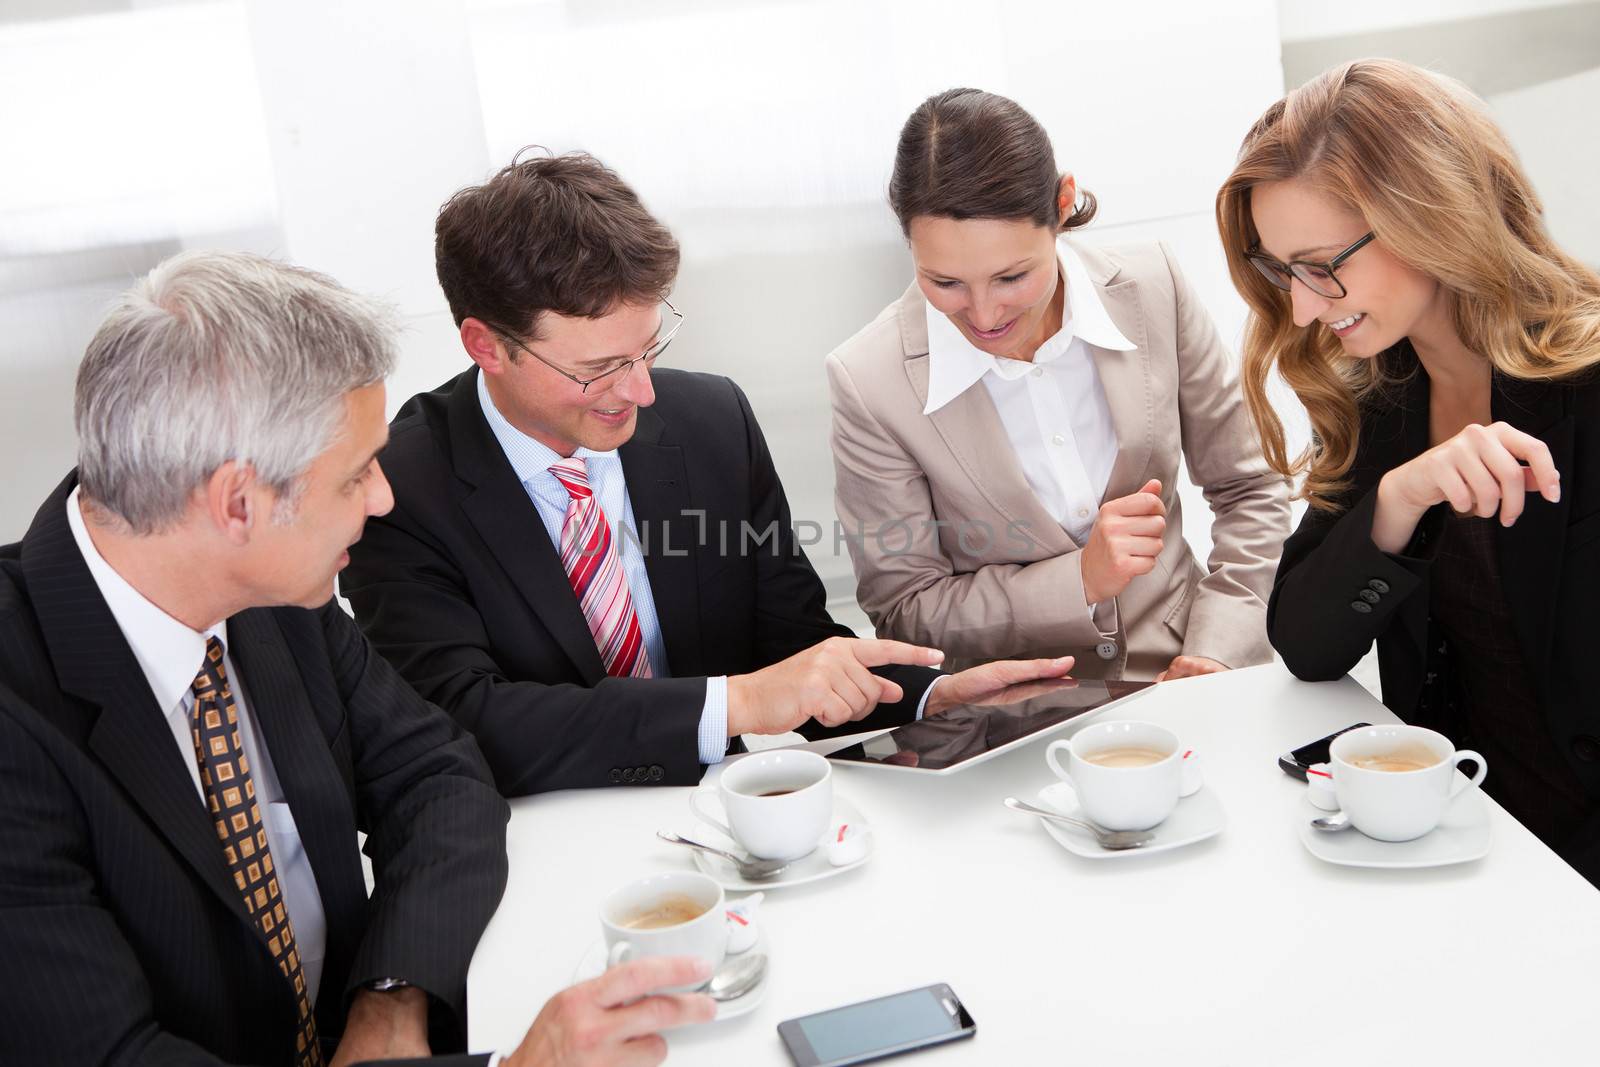 Business colleagues enjoying a coffee break smiling at something on the screen of a tablet held by one of the men